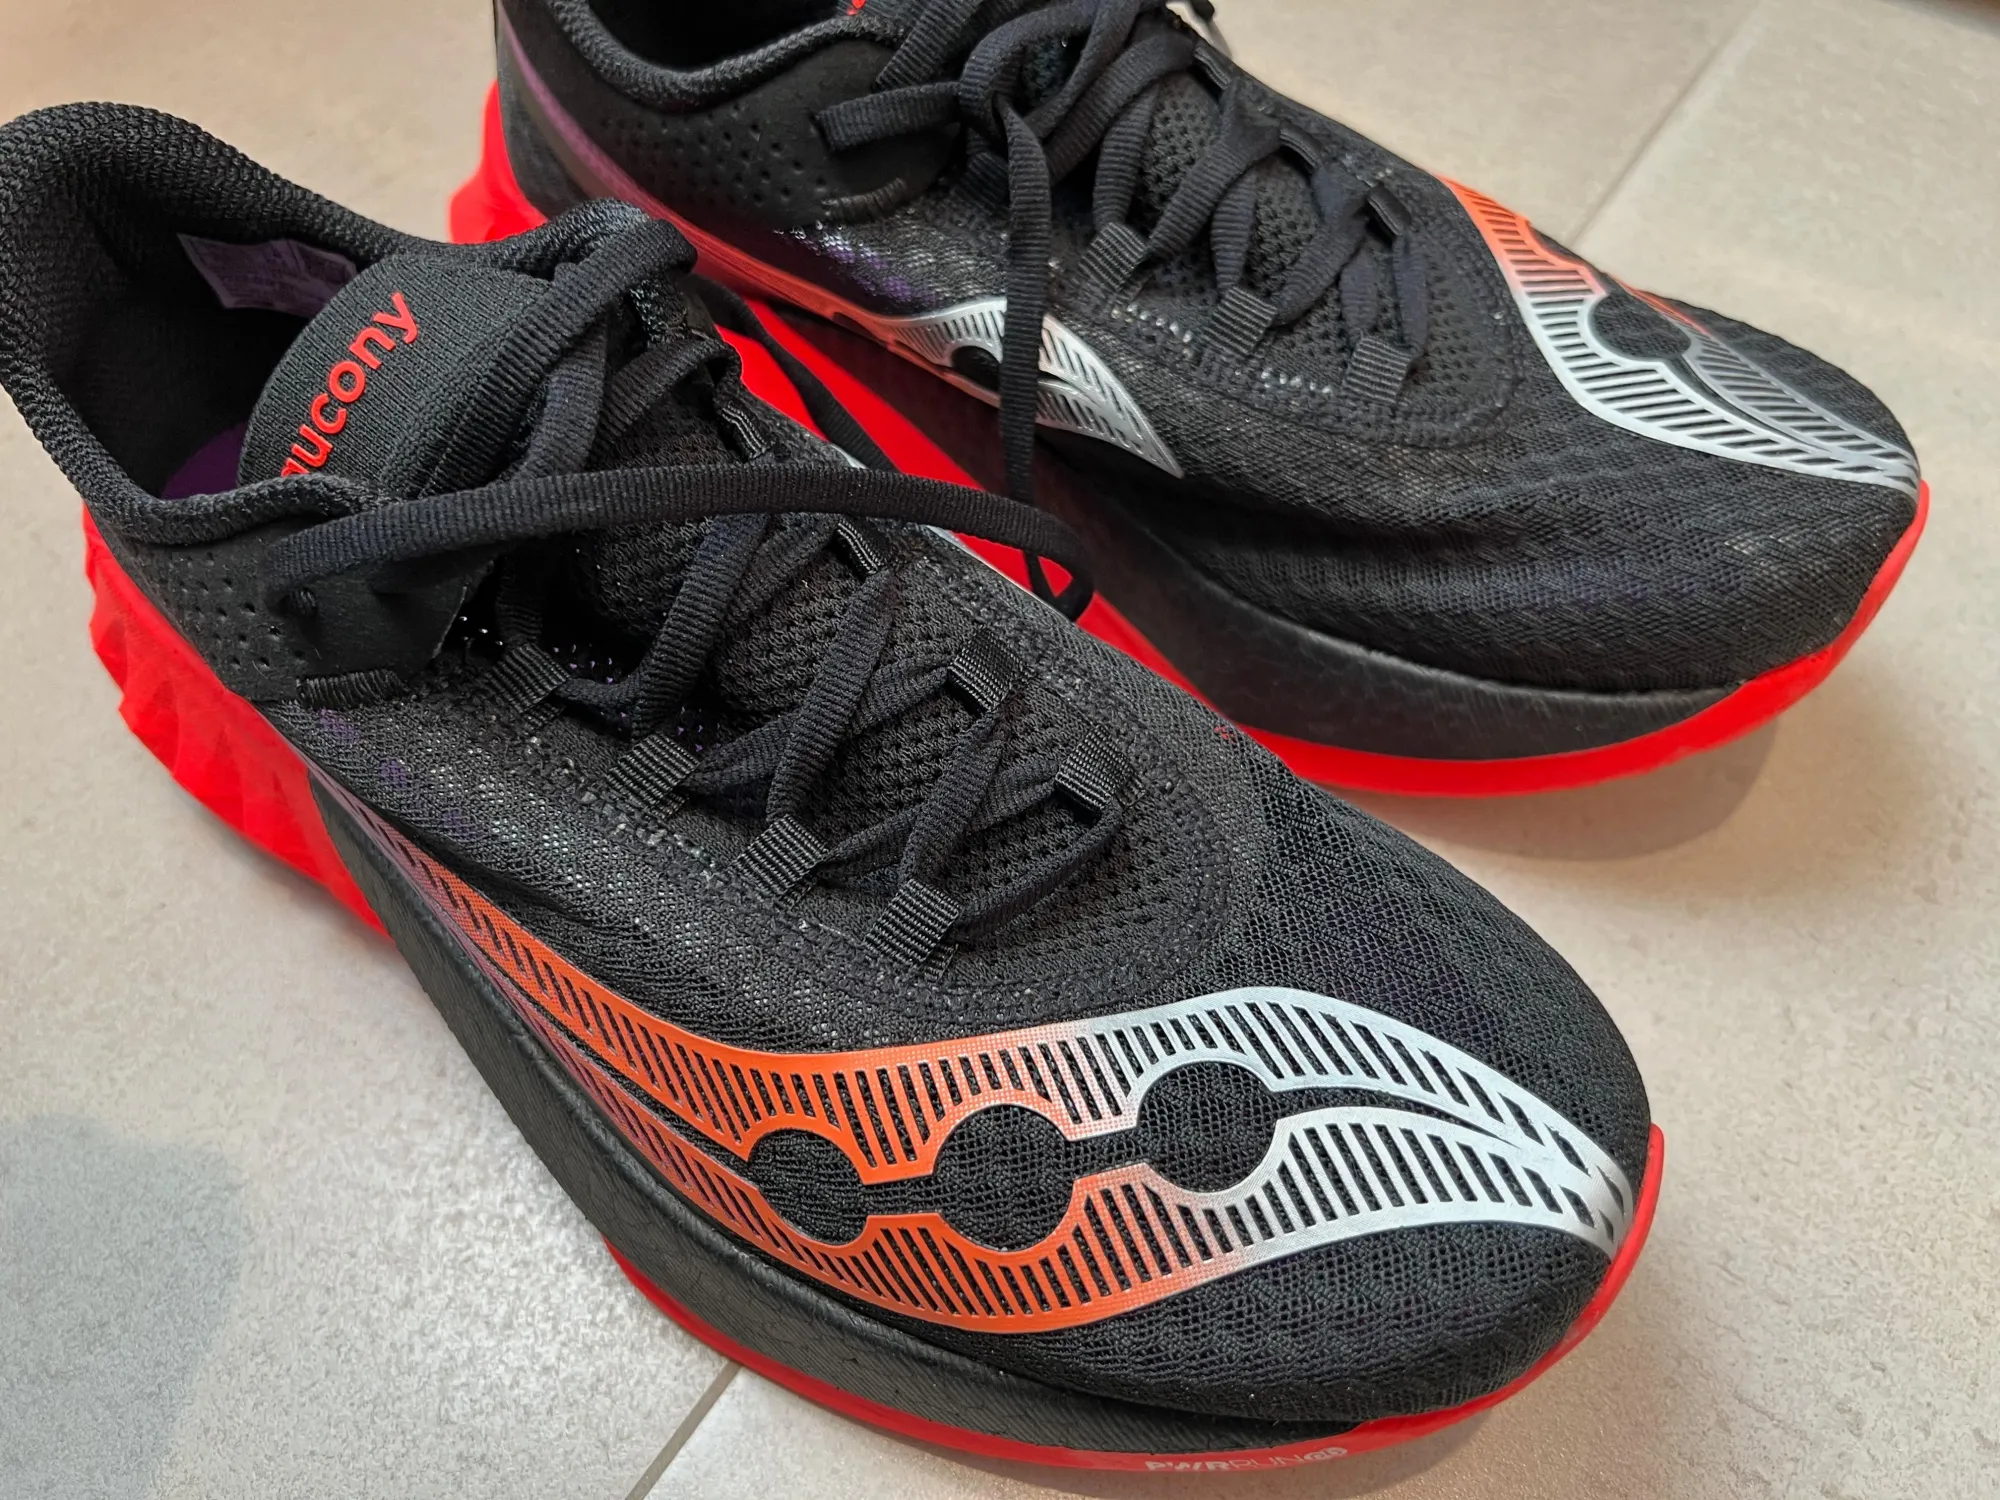 A photo of the black upper fabric of the Saucony Endorphin Pro 4